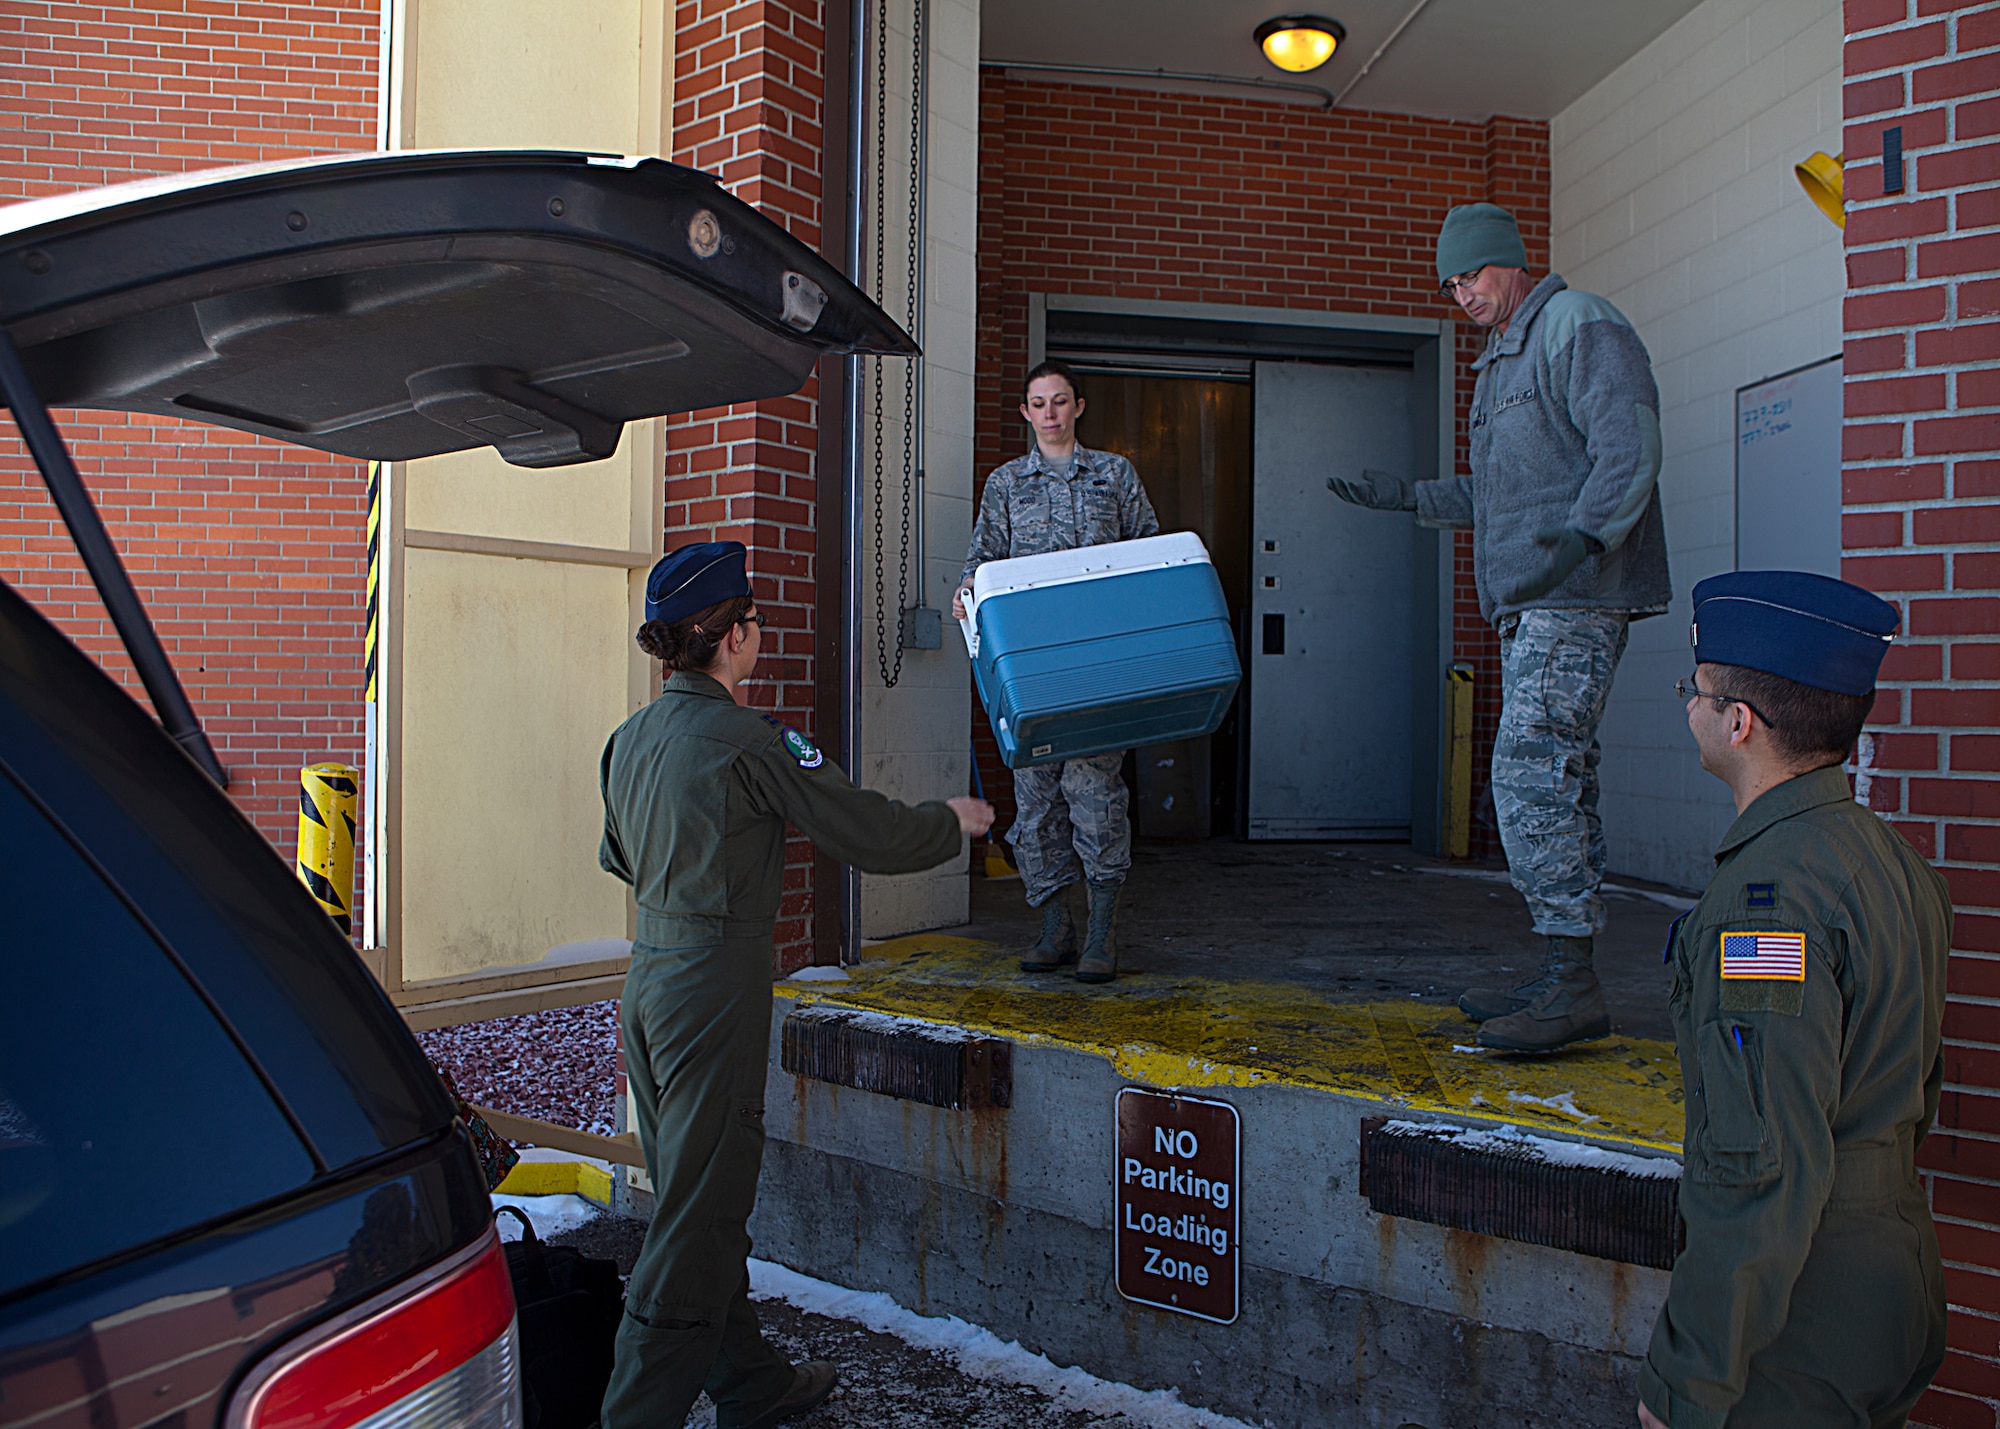 Staff Sgt. Kimberly Wood, 90th Operation Support Squadron, hands the missile alert facility and Feeding Operations cooler containing food to restock the missile alert facility kitchen to Capt. Caitlin Olson, 321st Missile Squadron ICBM combat crew commander. (U.S. Air Force photo by 2nd Lt. Christen Downing)